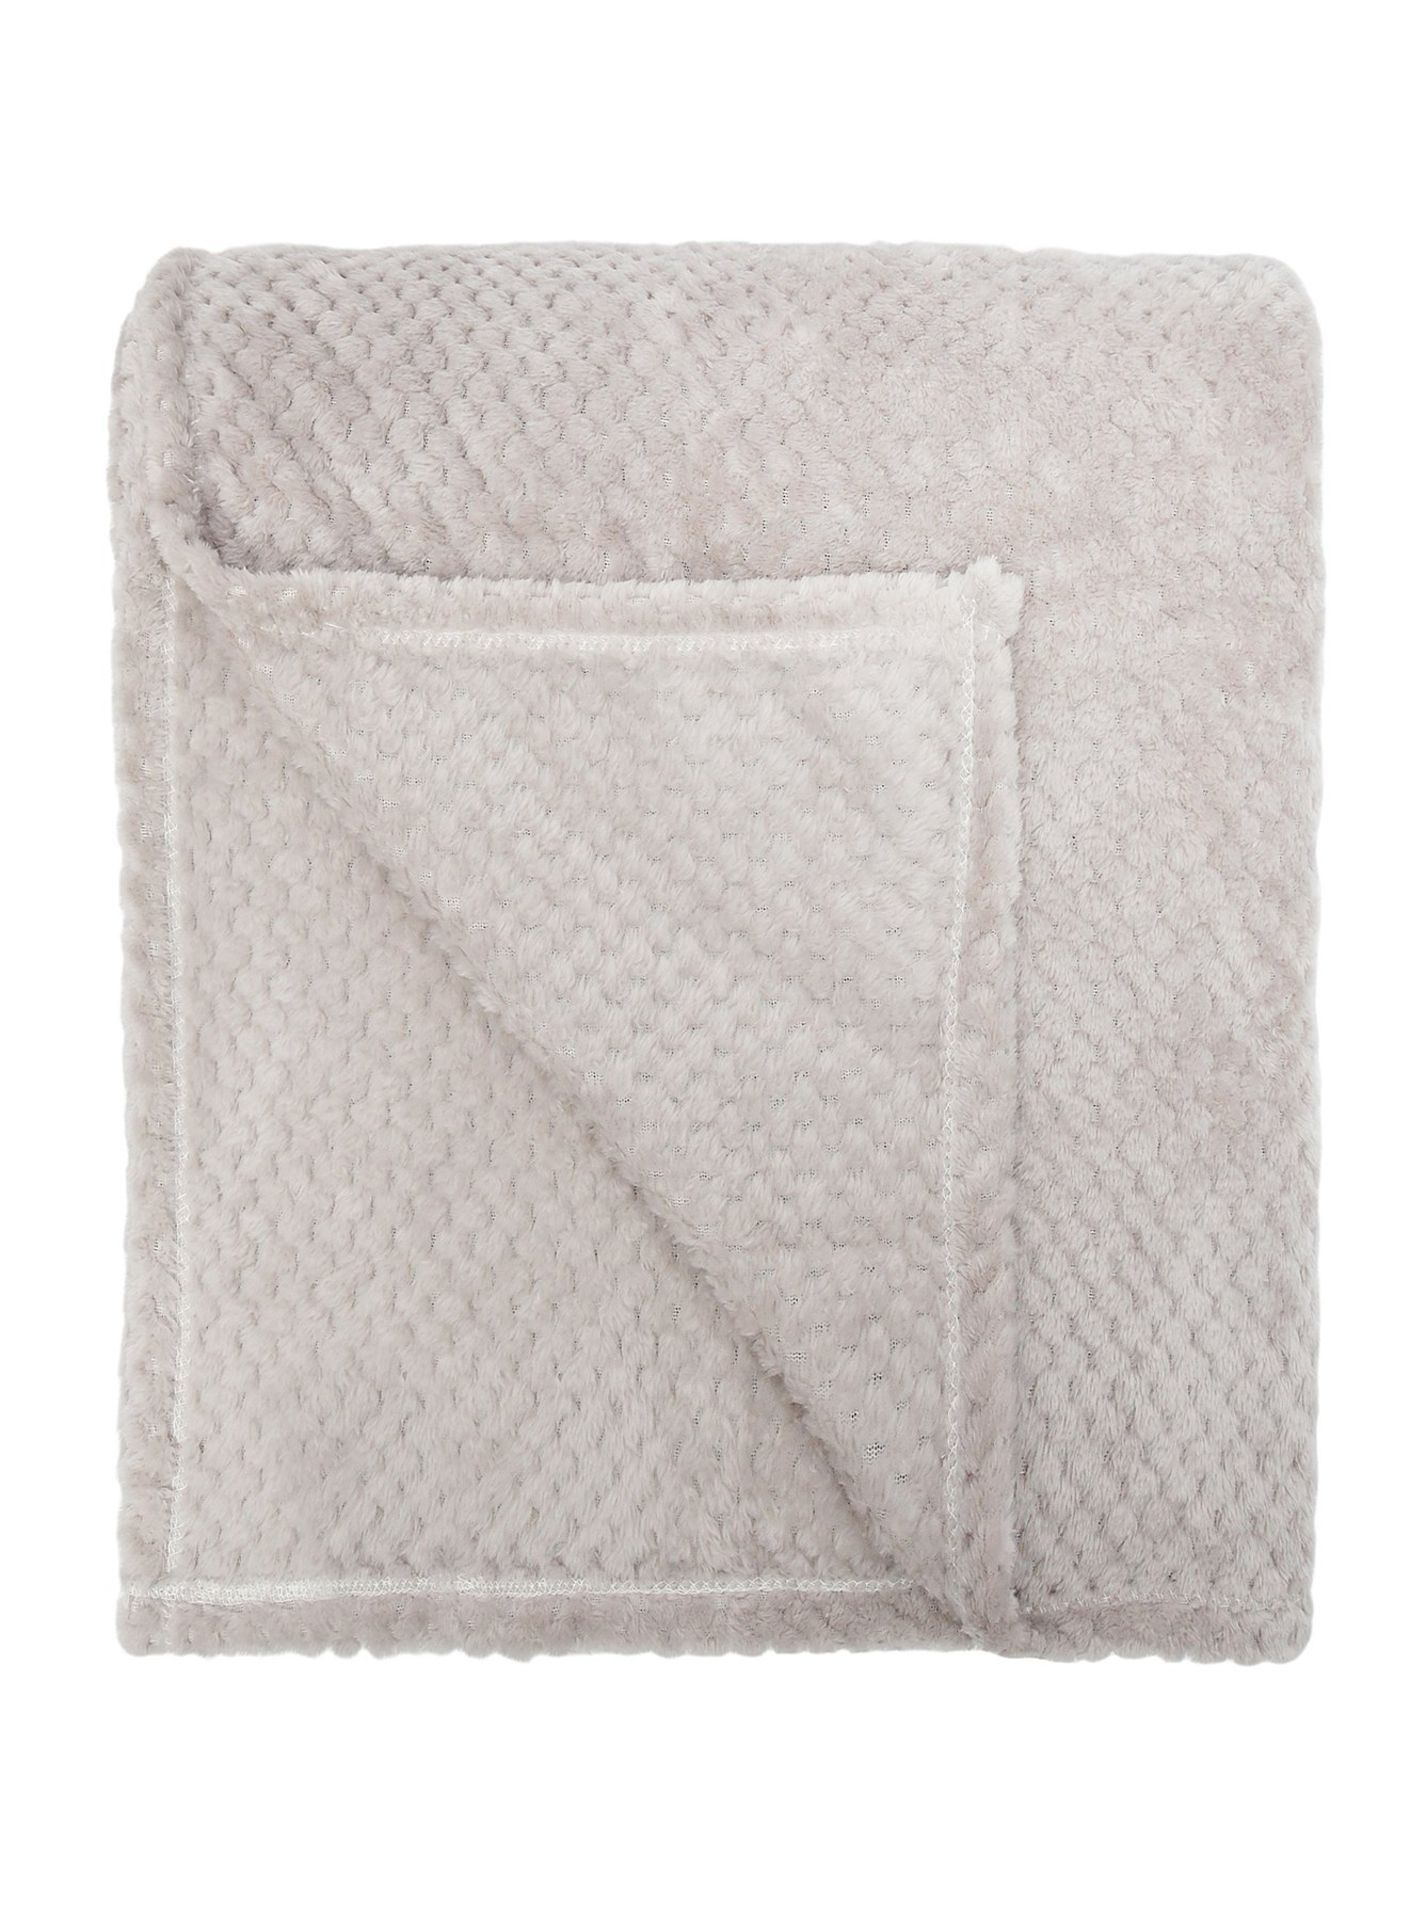 16x NEW & PACKAGED SLEEPDOWN Cosy Collection Soft Touch Waffle Fleece Throw 130 x 160cm - NATURAL. - Image 4 of 6